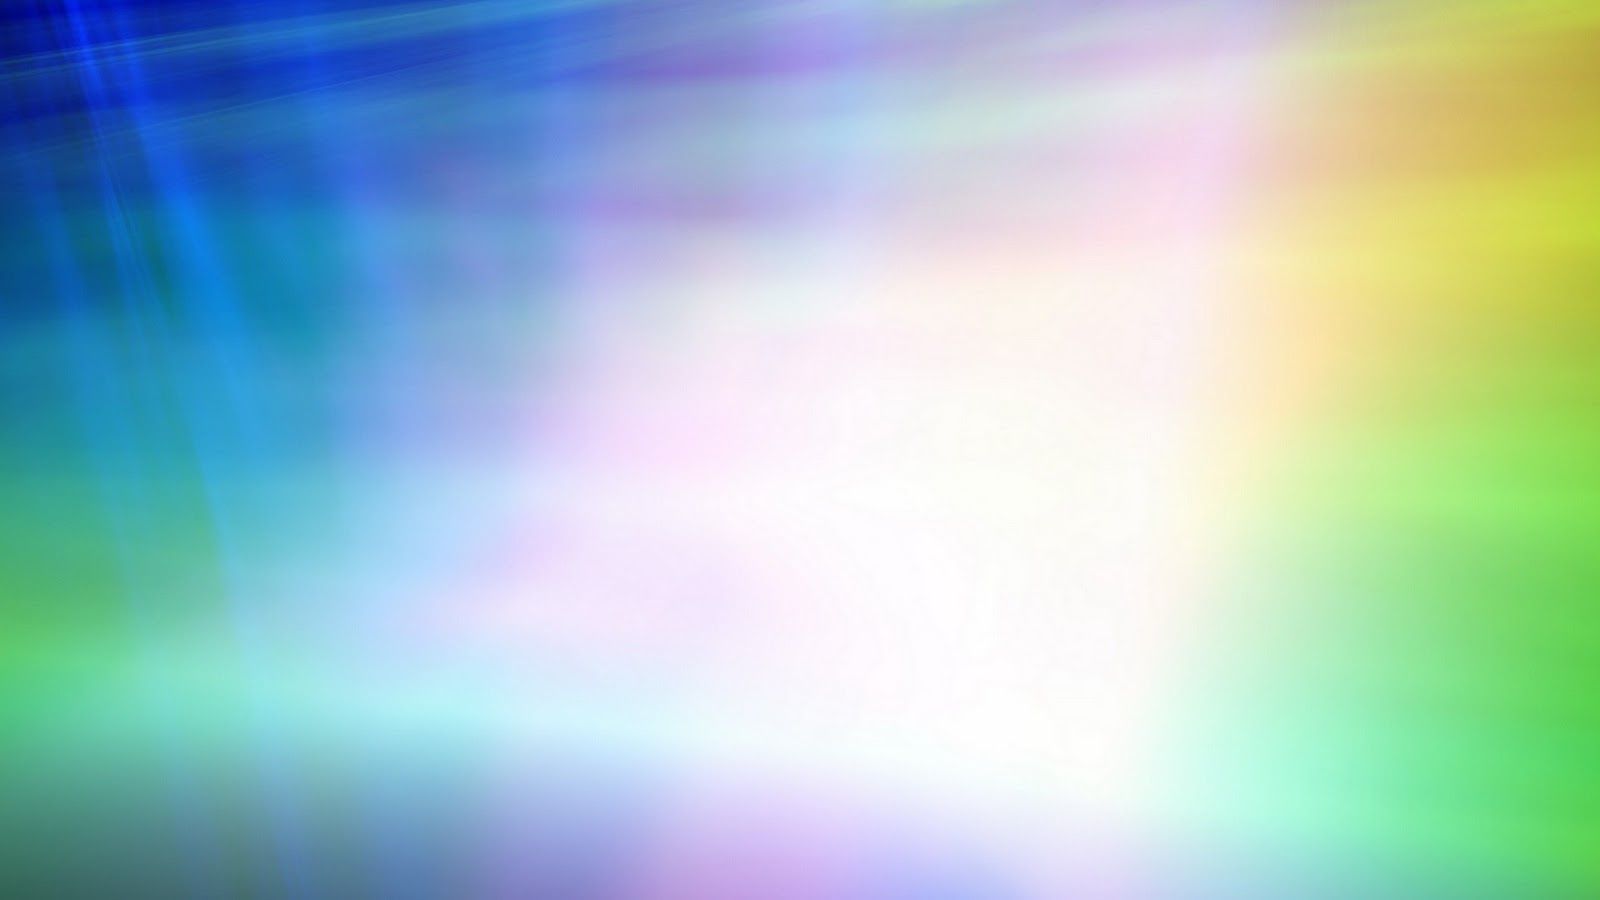 Light Colourful Background Hd - 1600x900 Wallpaper 